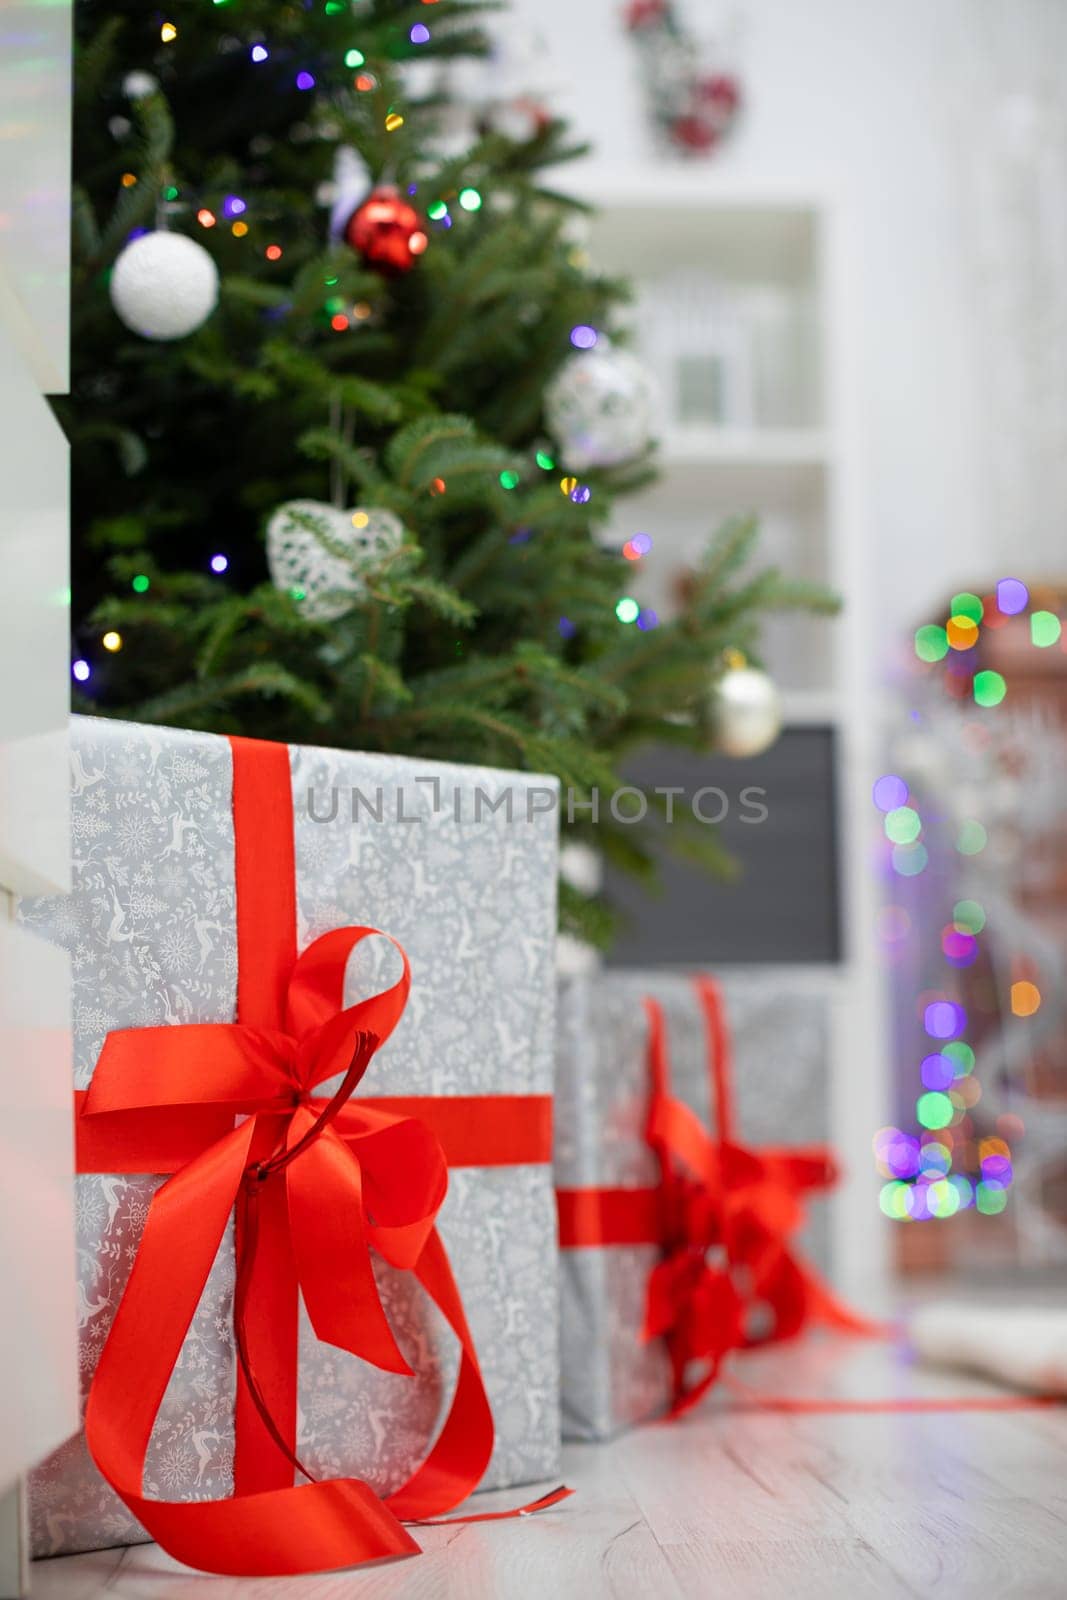 Elegant package on a bright floor. Silver gifts with red ribbons under Christmas tree.